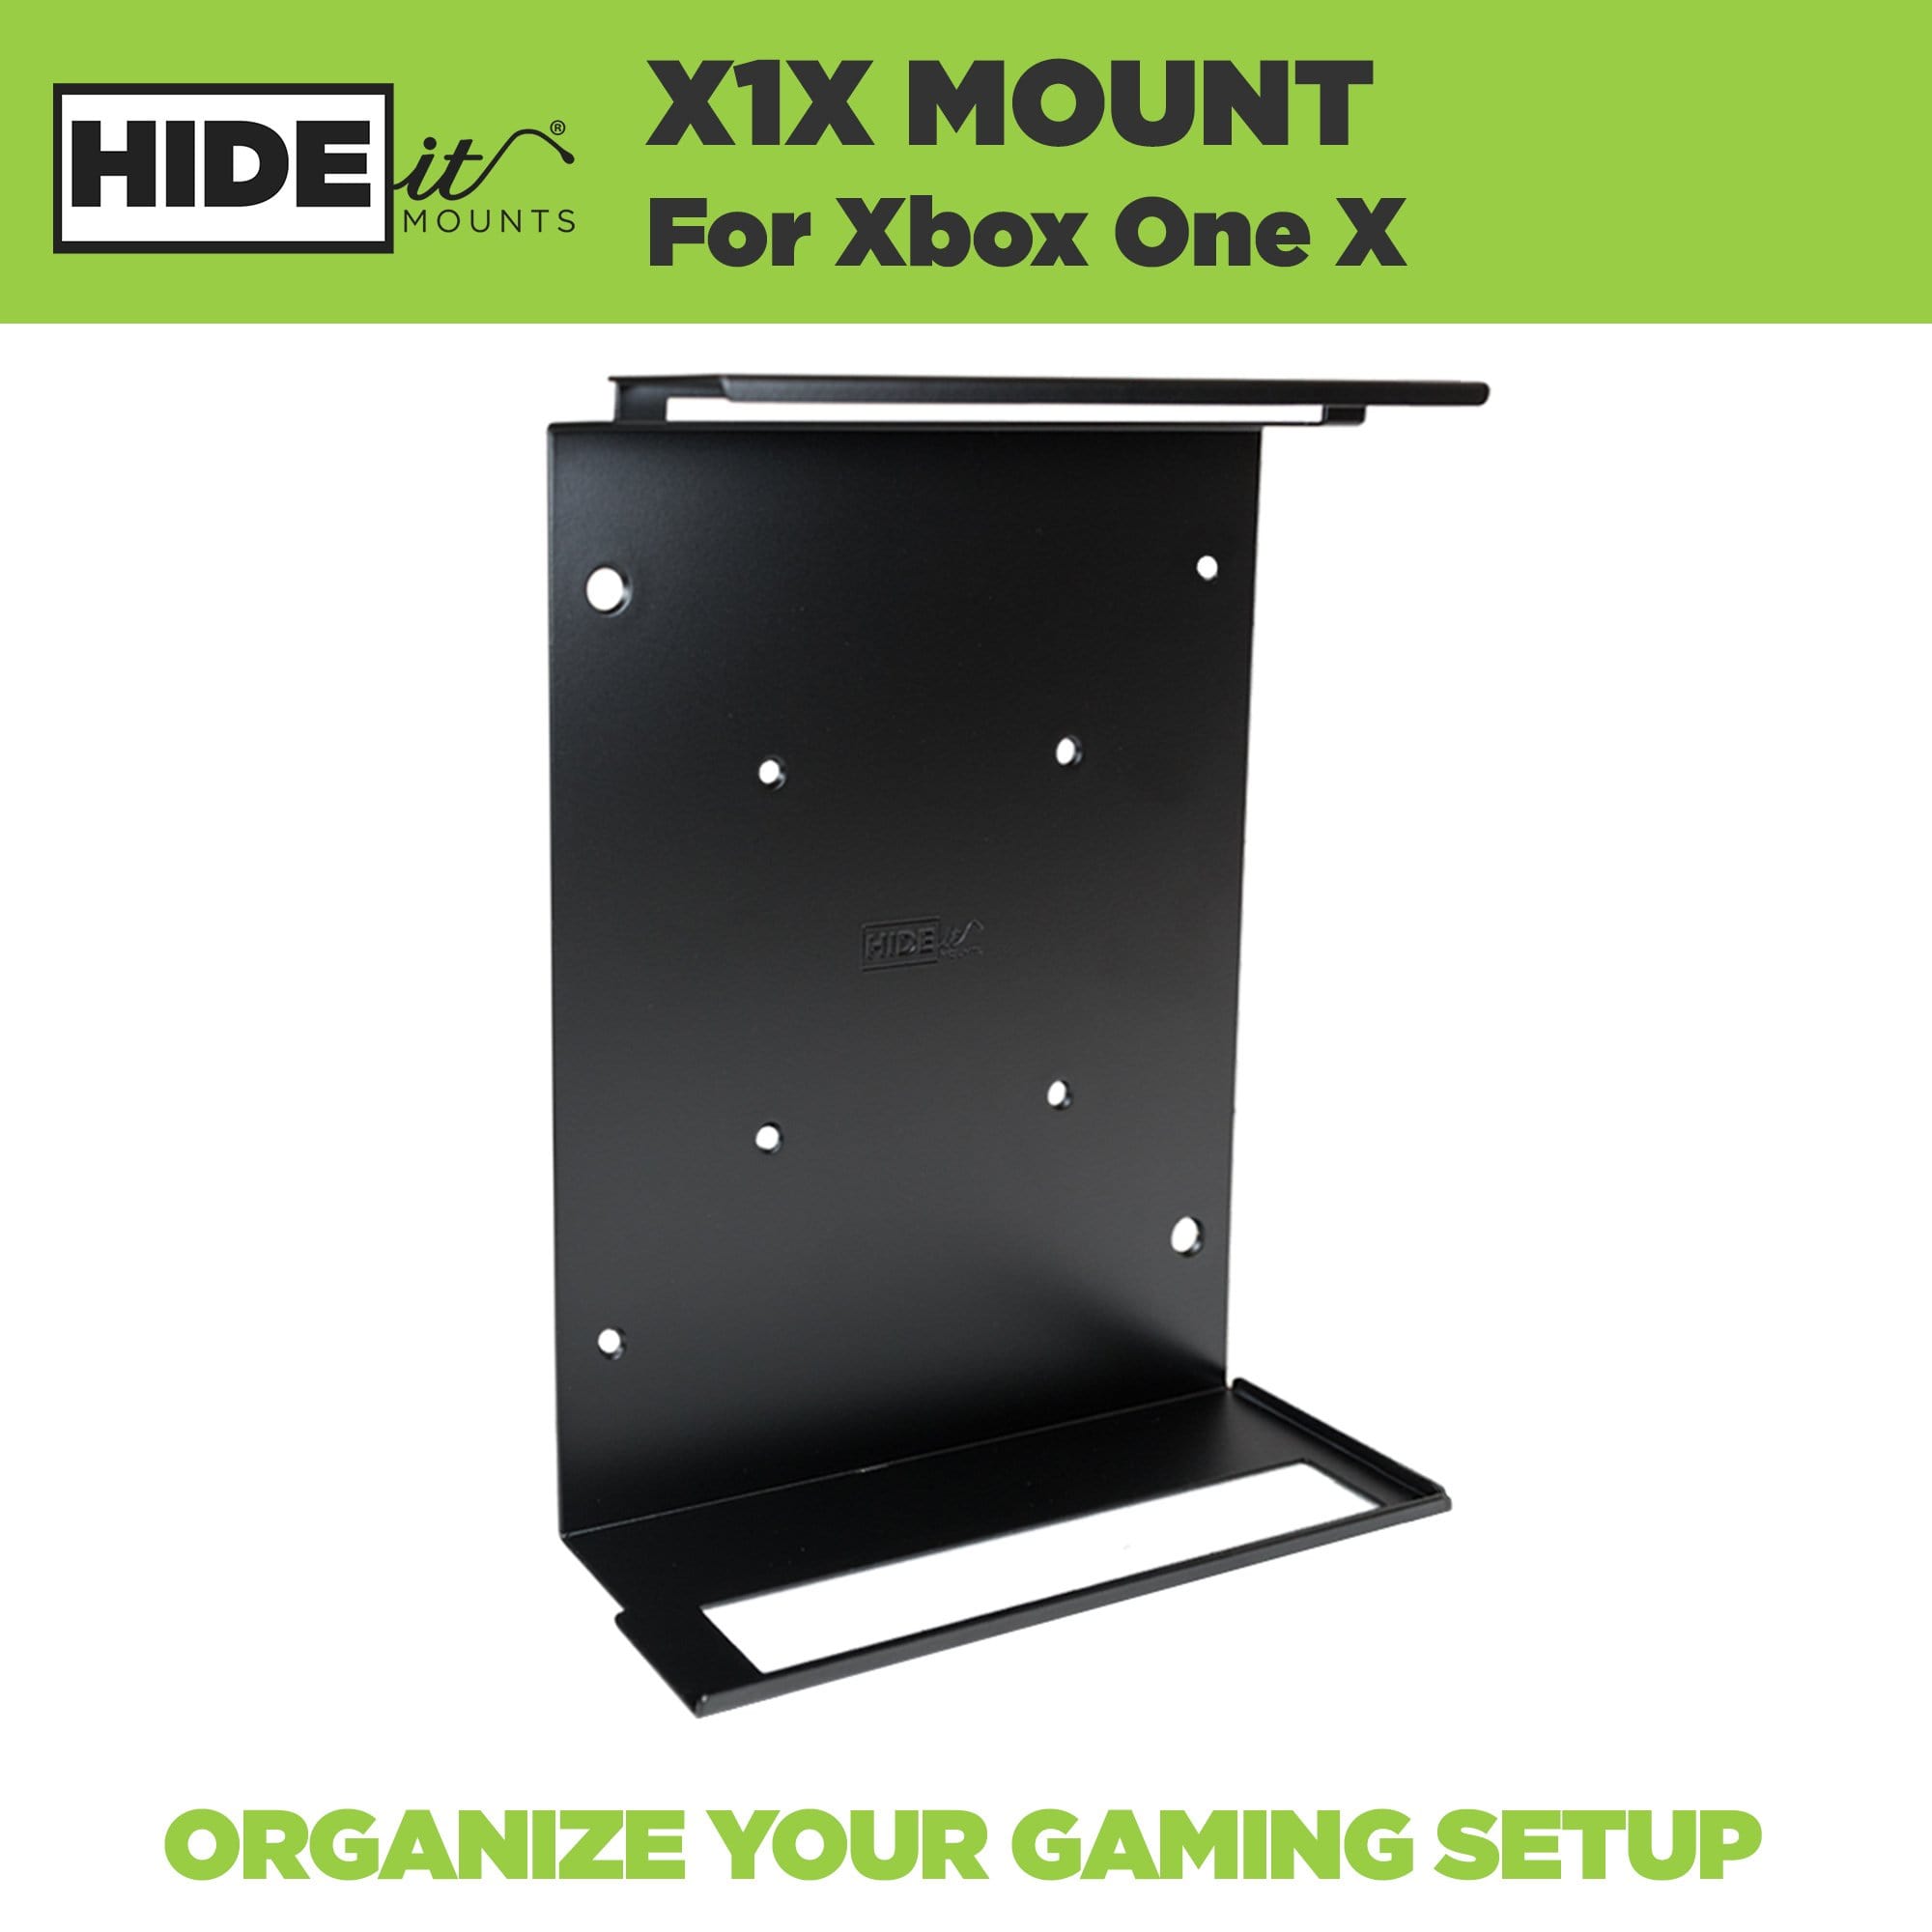  HIDEit Mounts X1S Wall Mount for Xbox One S - Patented in 2019,  Made in USA - Steel Mount for Xbox One S to Safely Store Your Xbox One S on